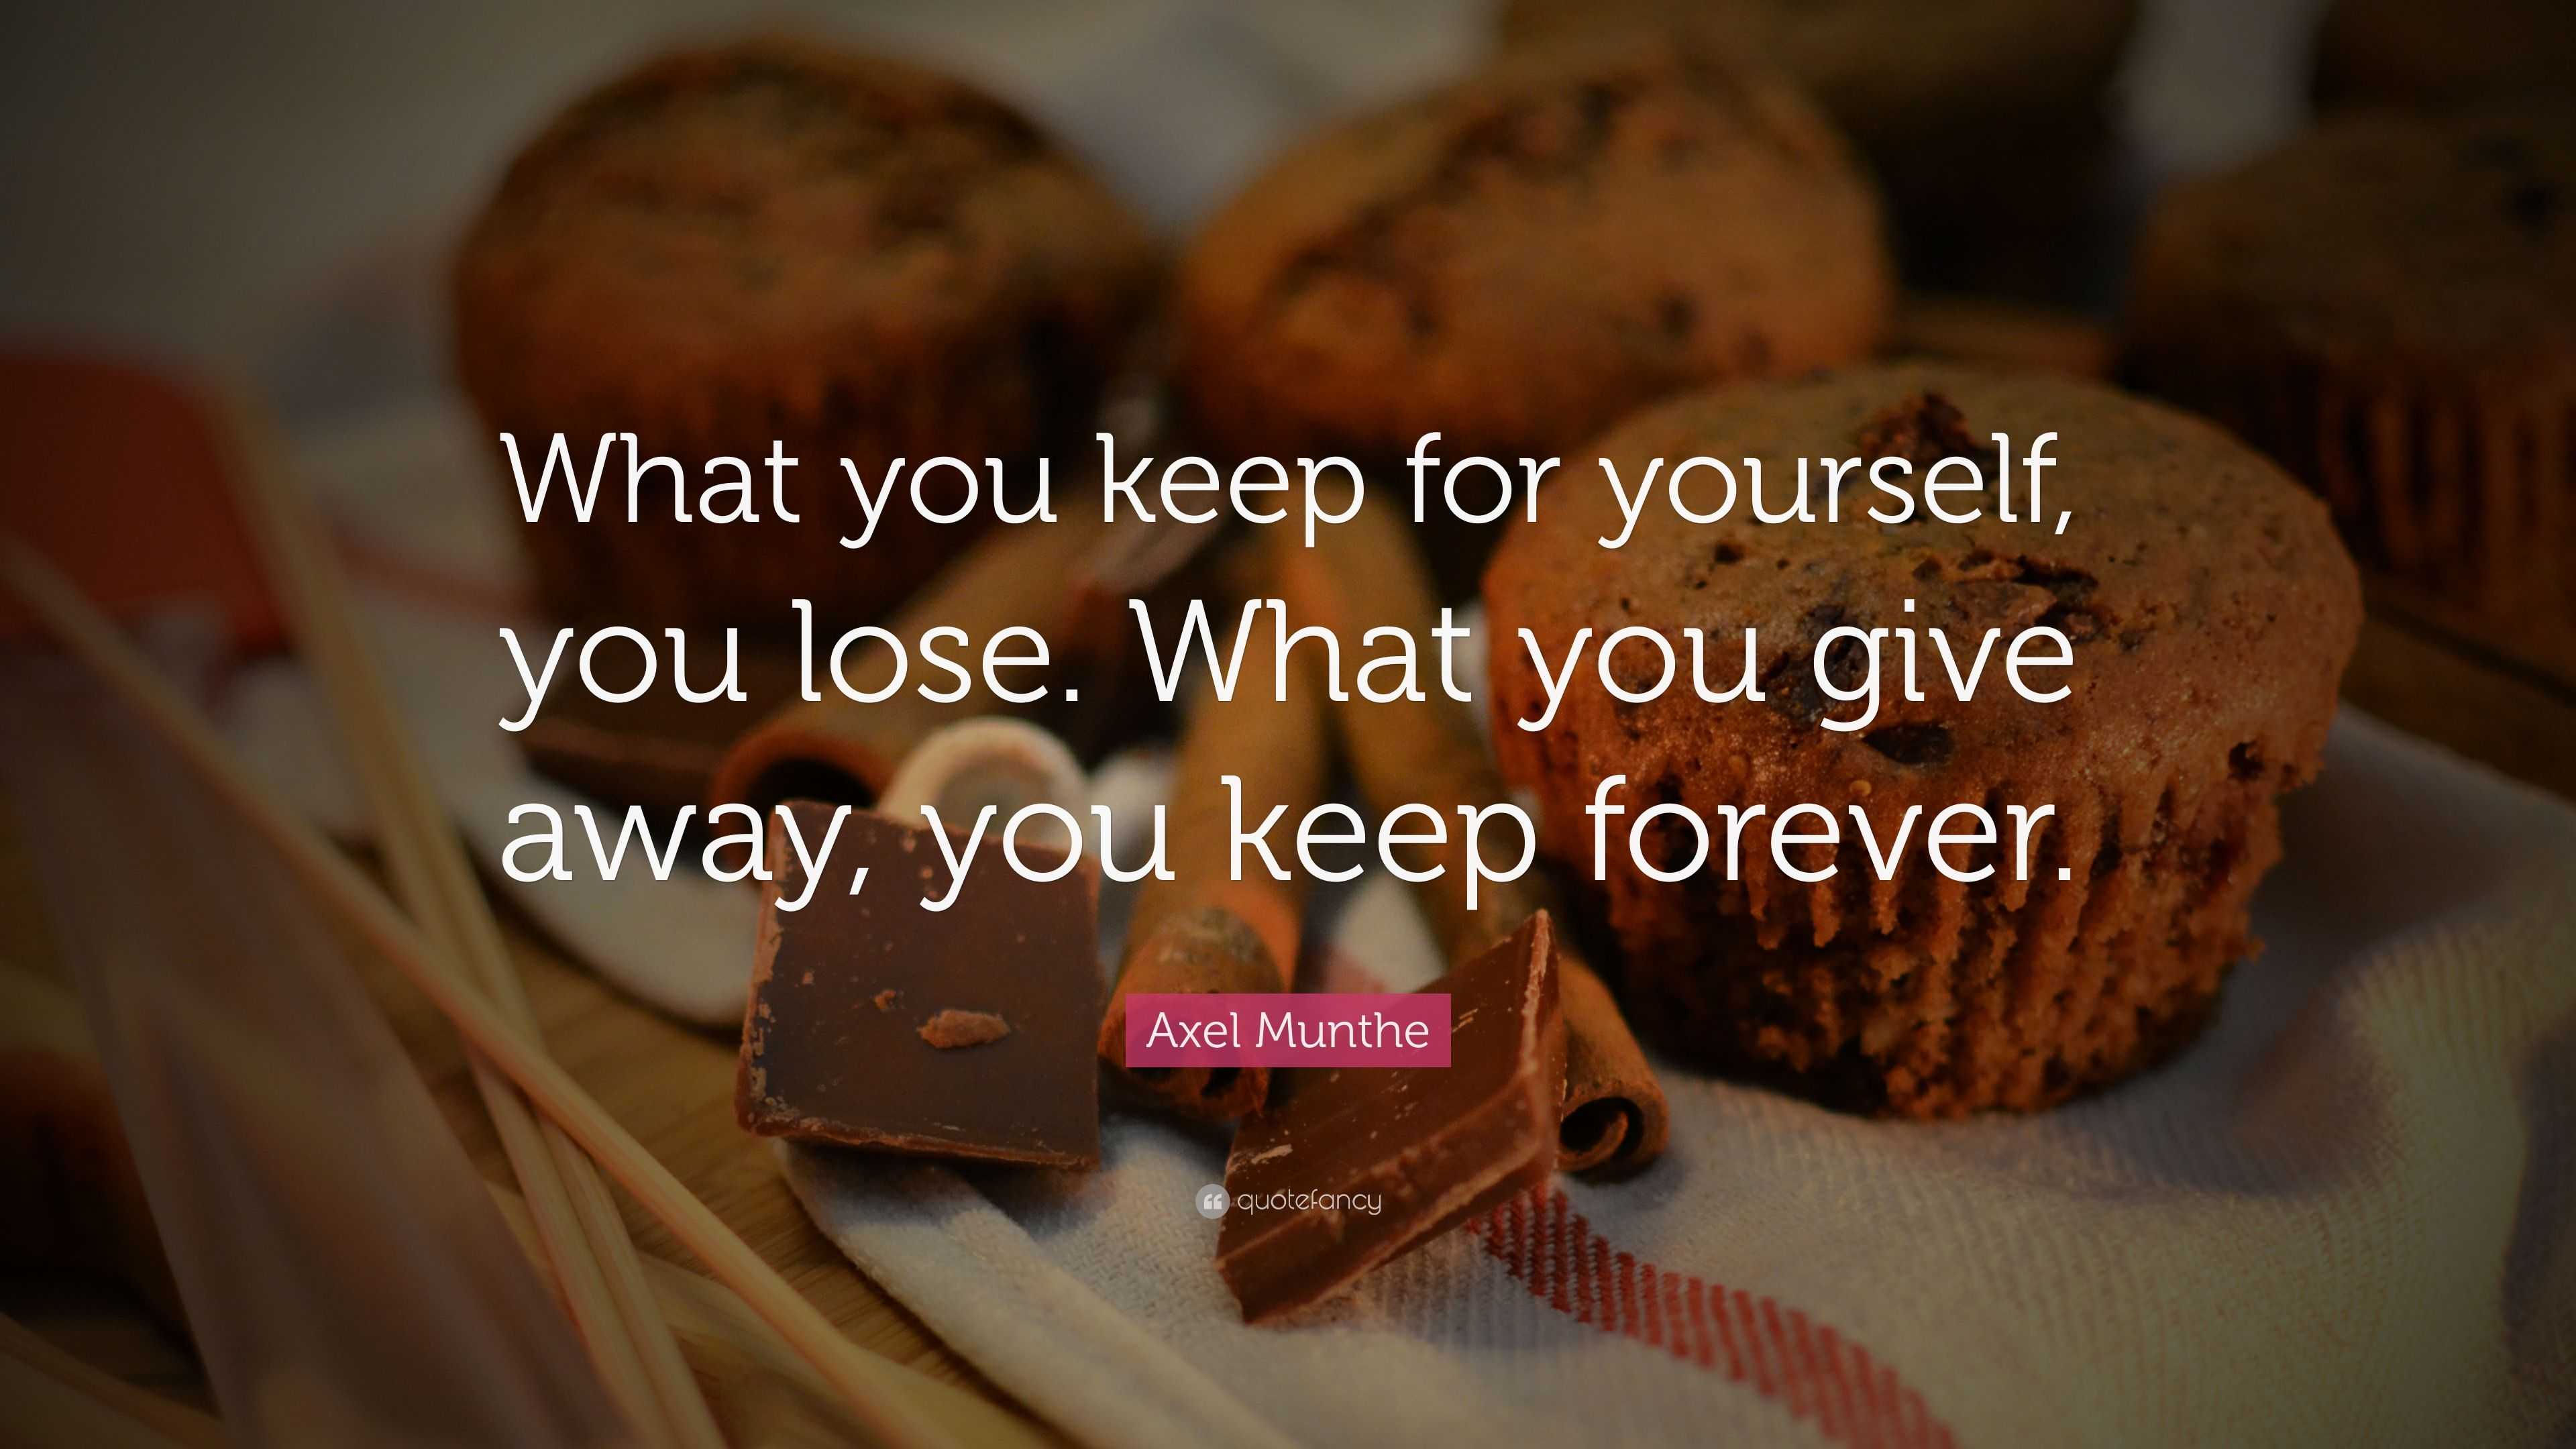 Axel Munthe Quote: “What you keep for yourself, you lose. What you give ...